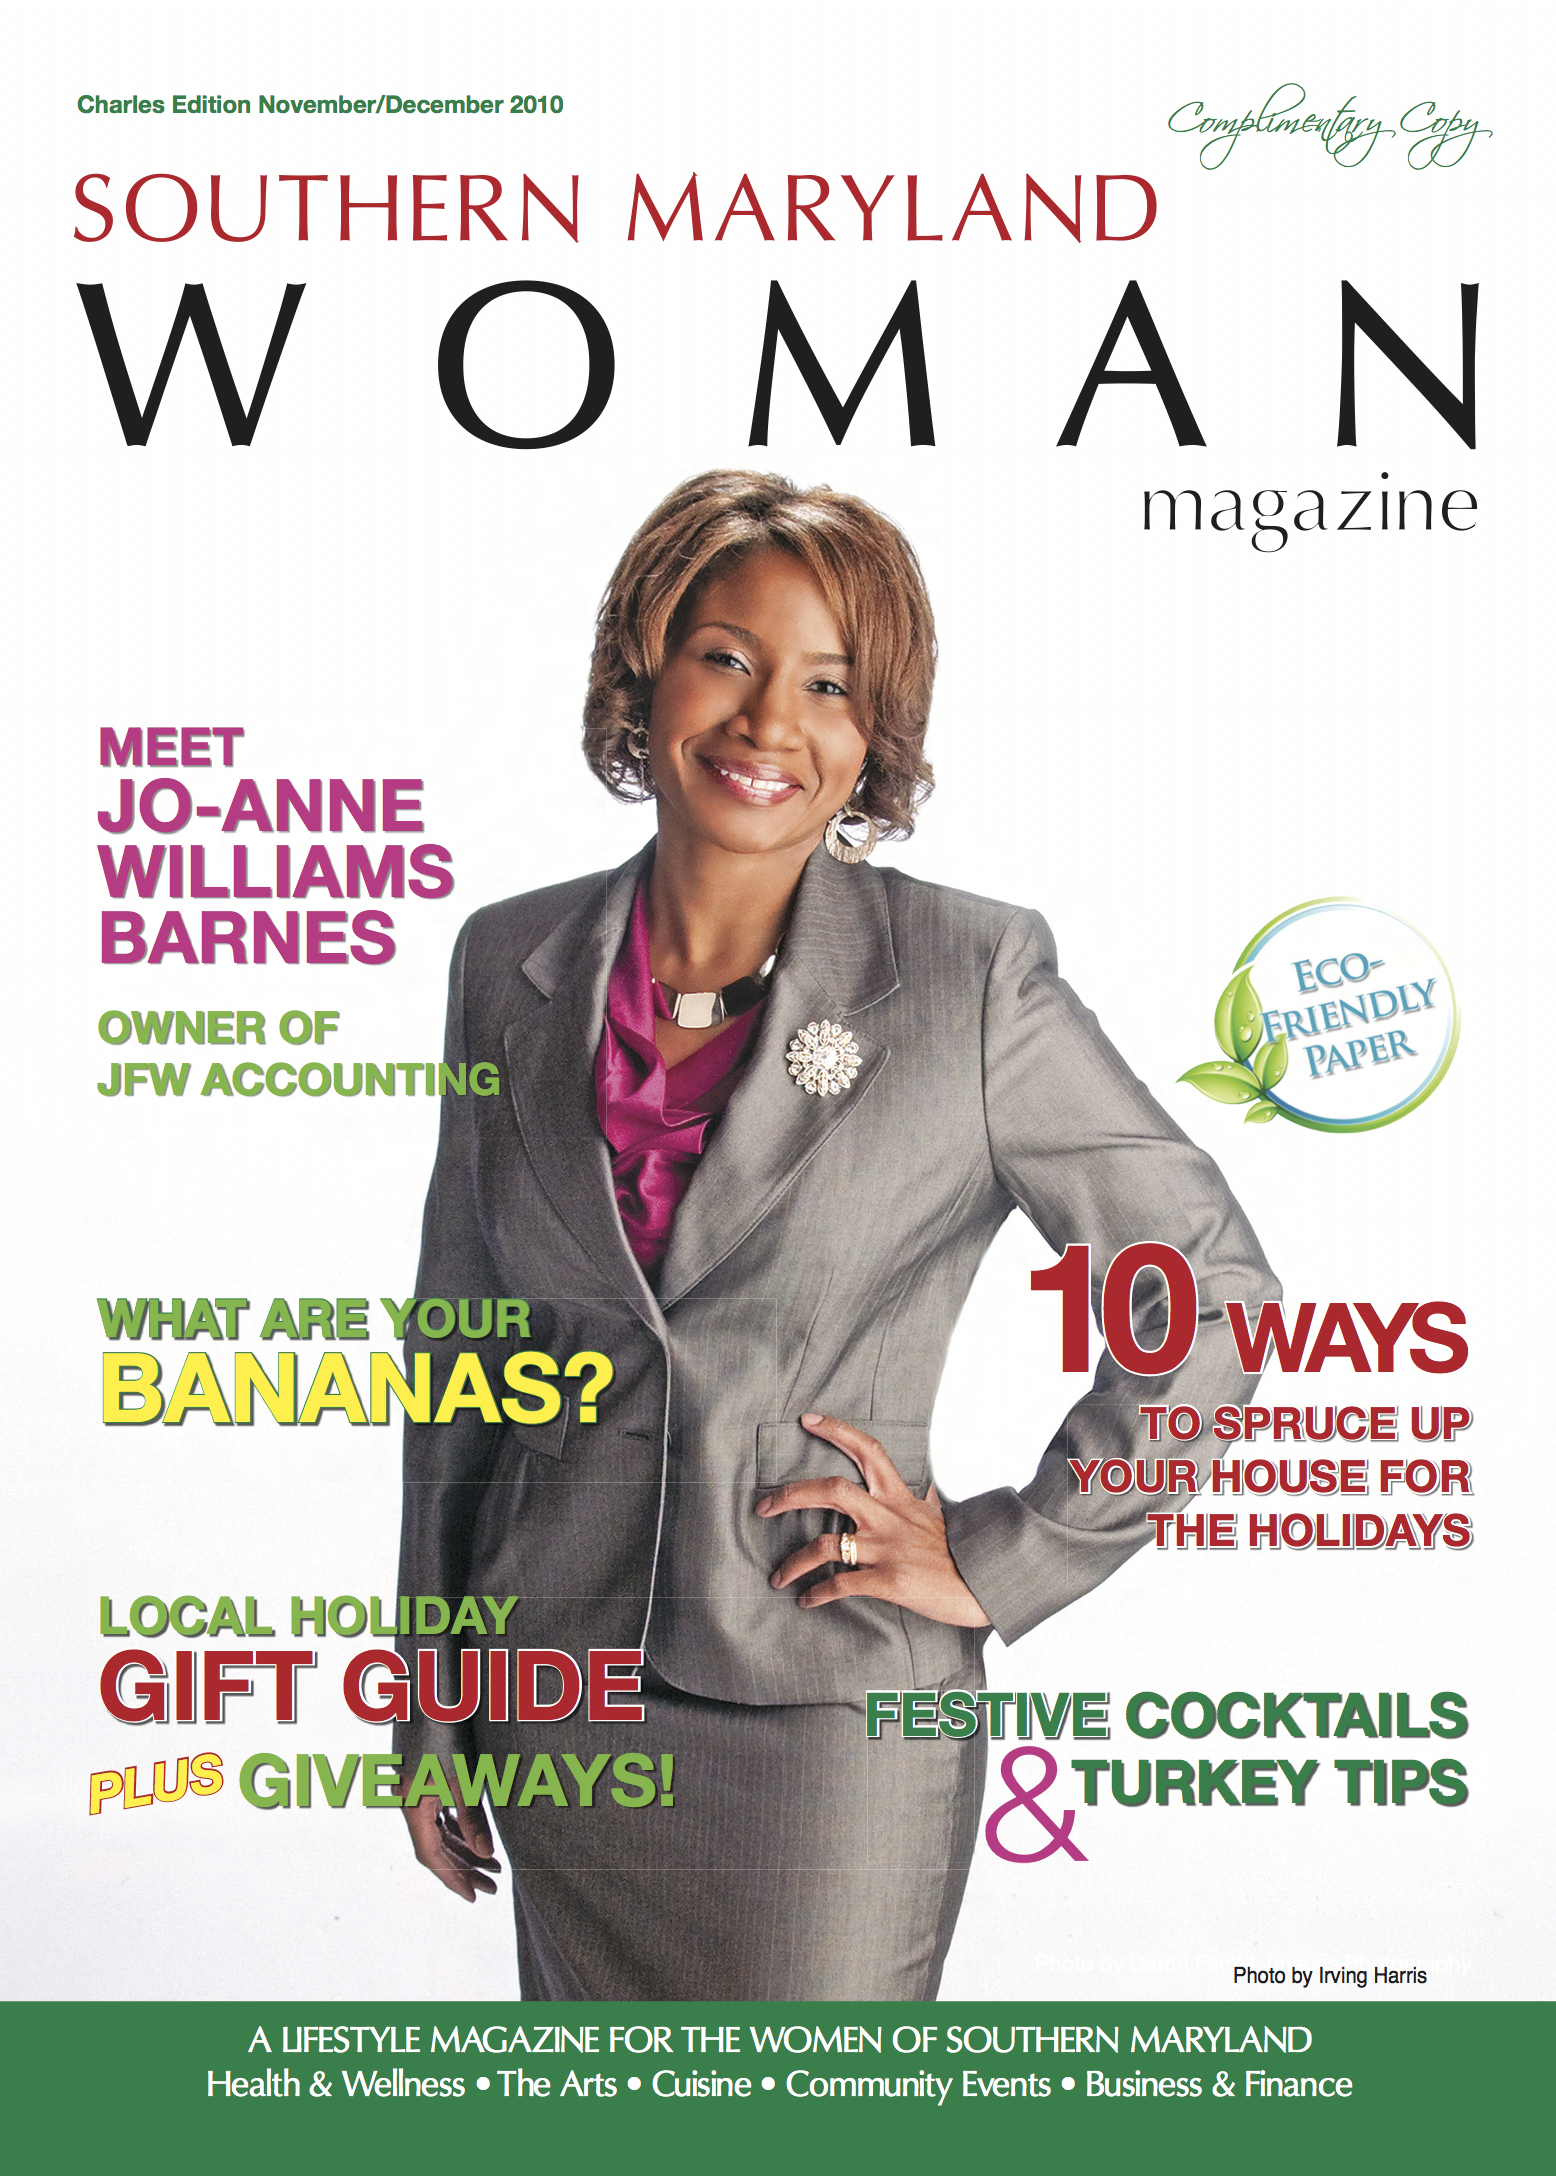 Another cover for Southern Maryland Woman Magazine